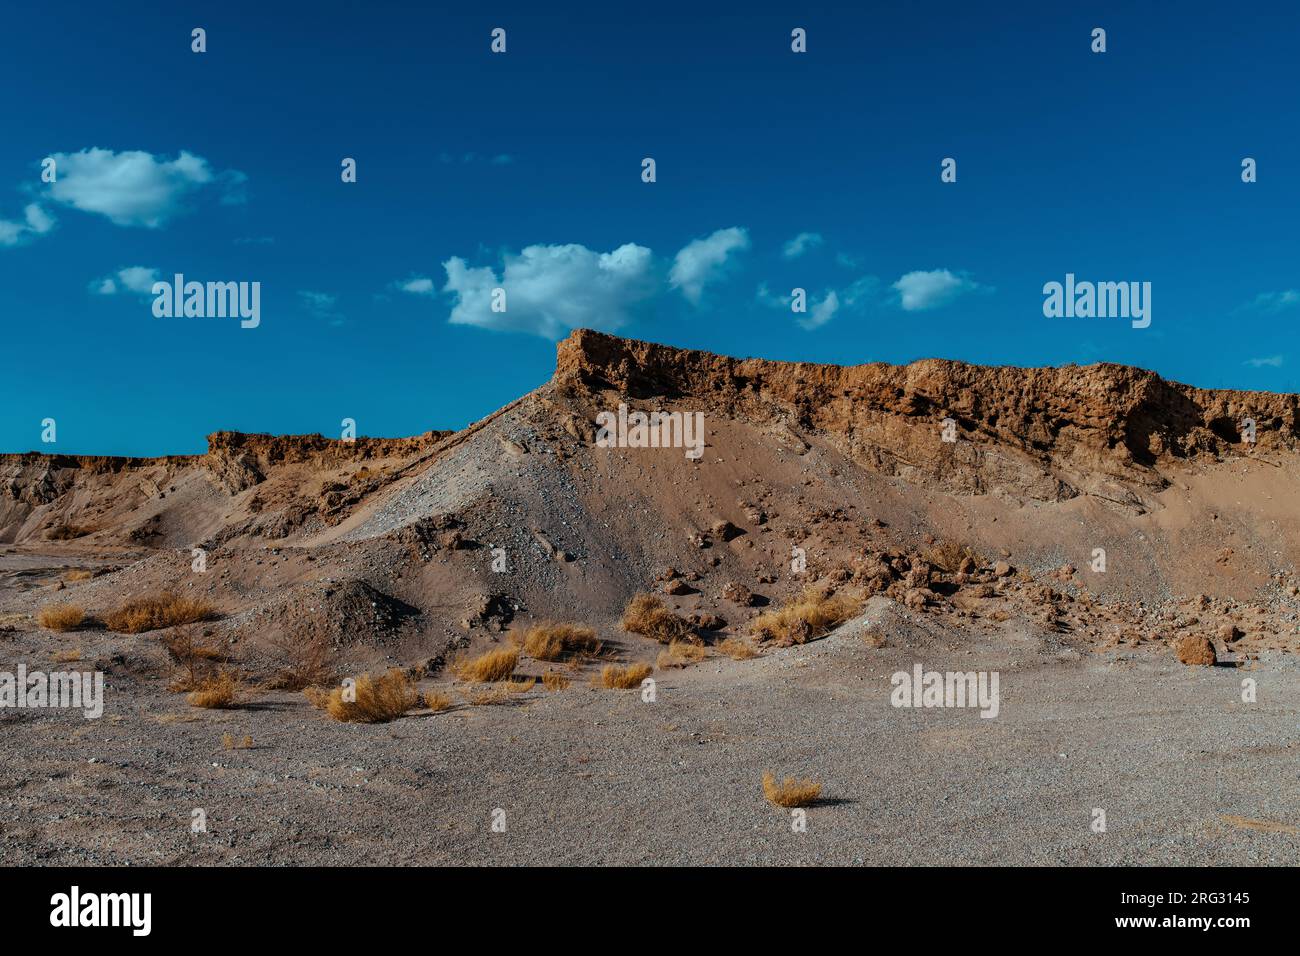 Sand and gravel quarry, Kyrgyzstan Stock Photo